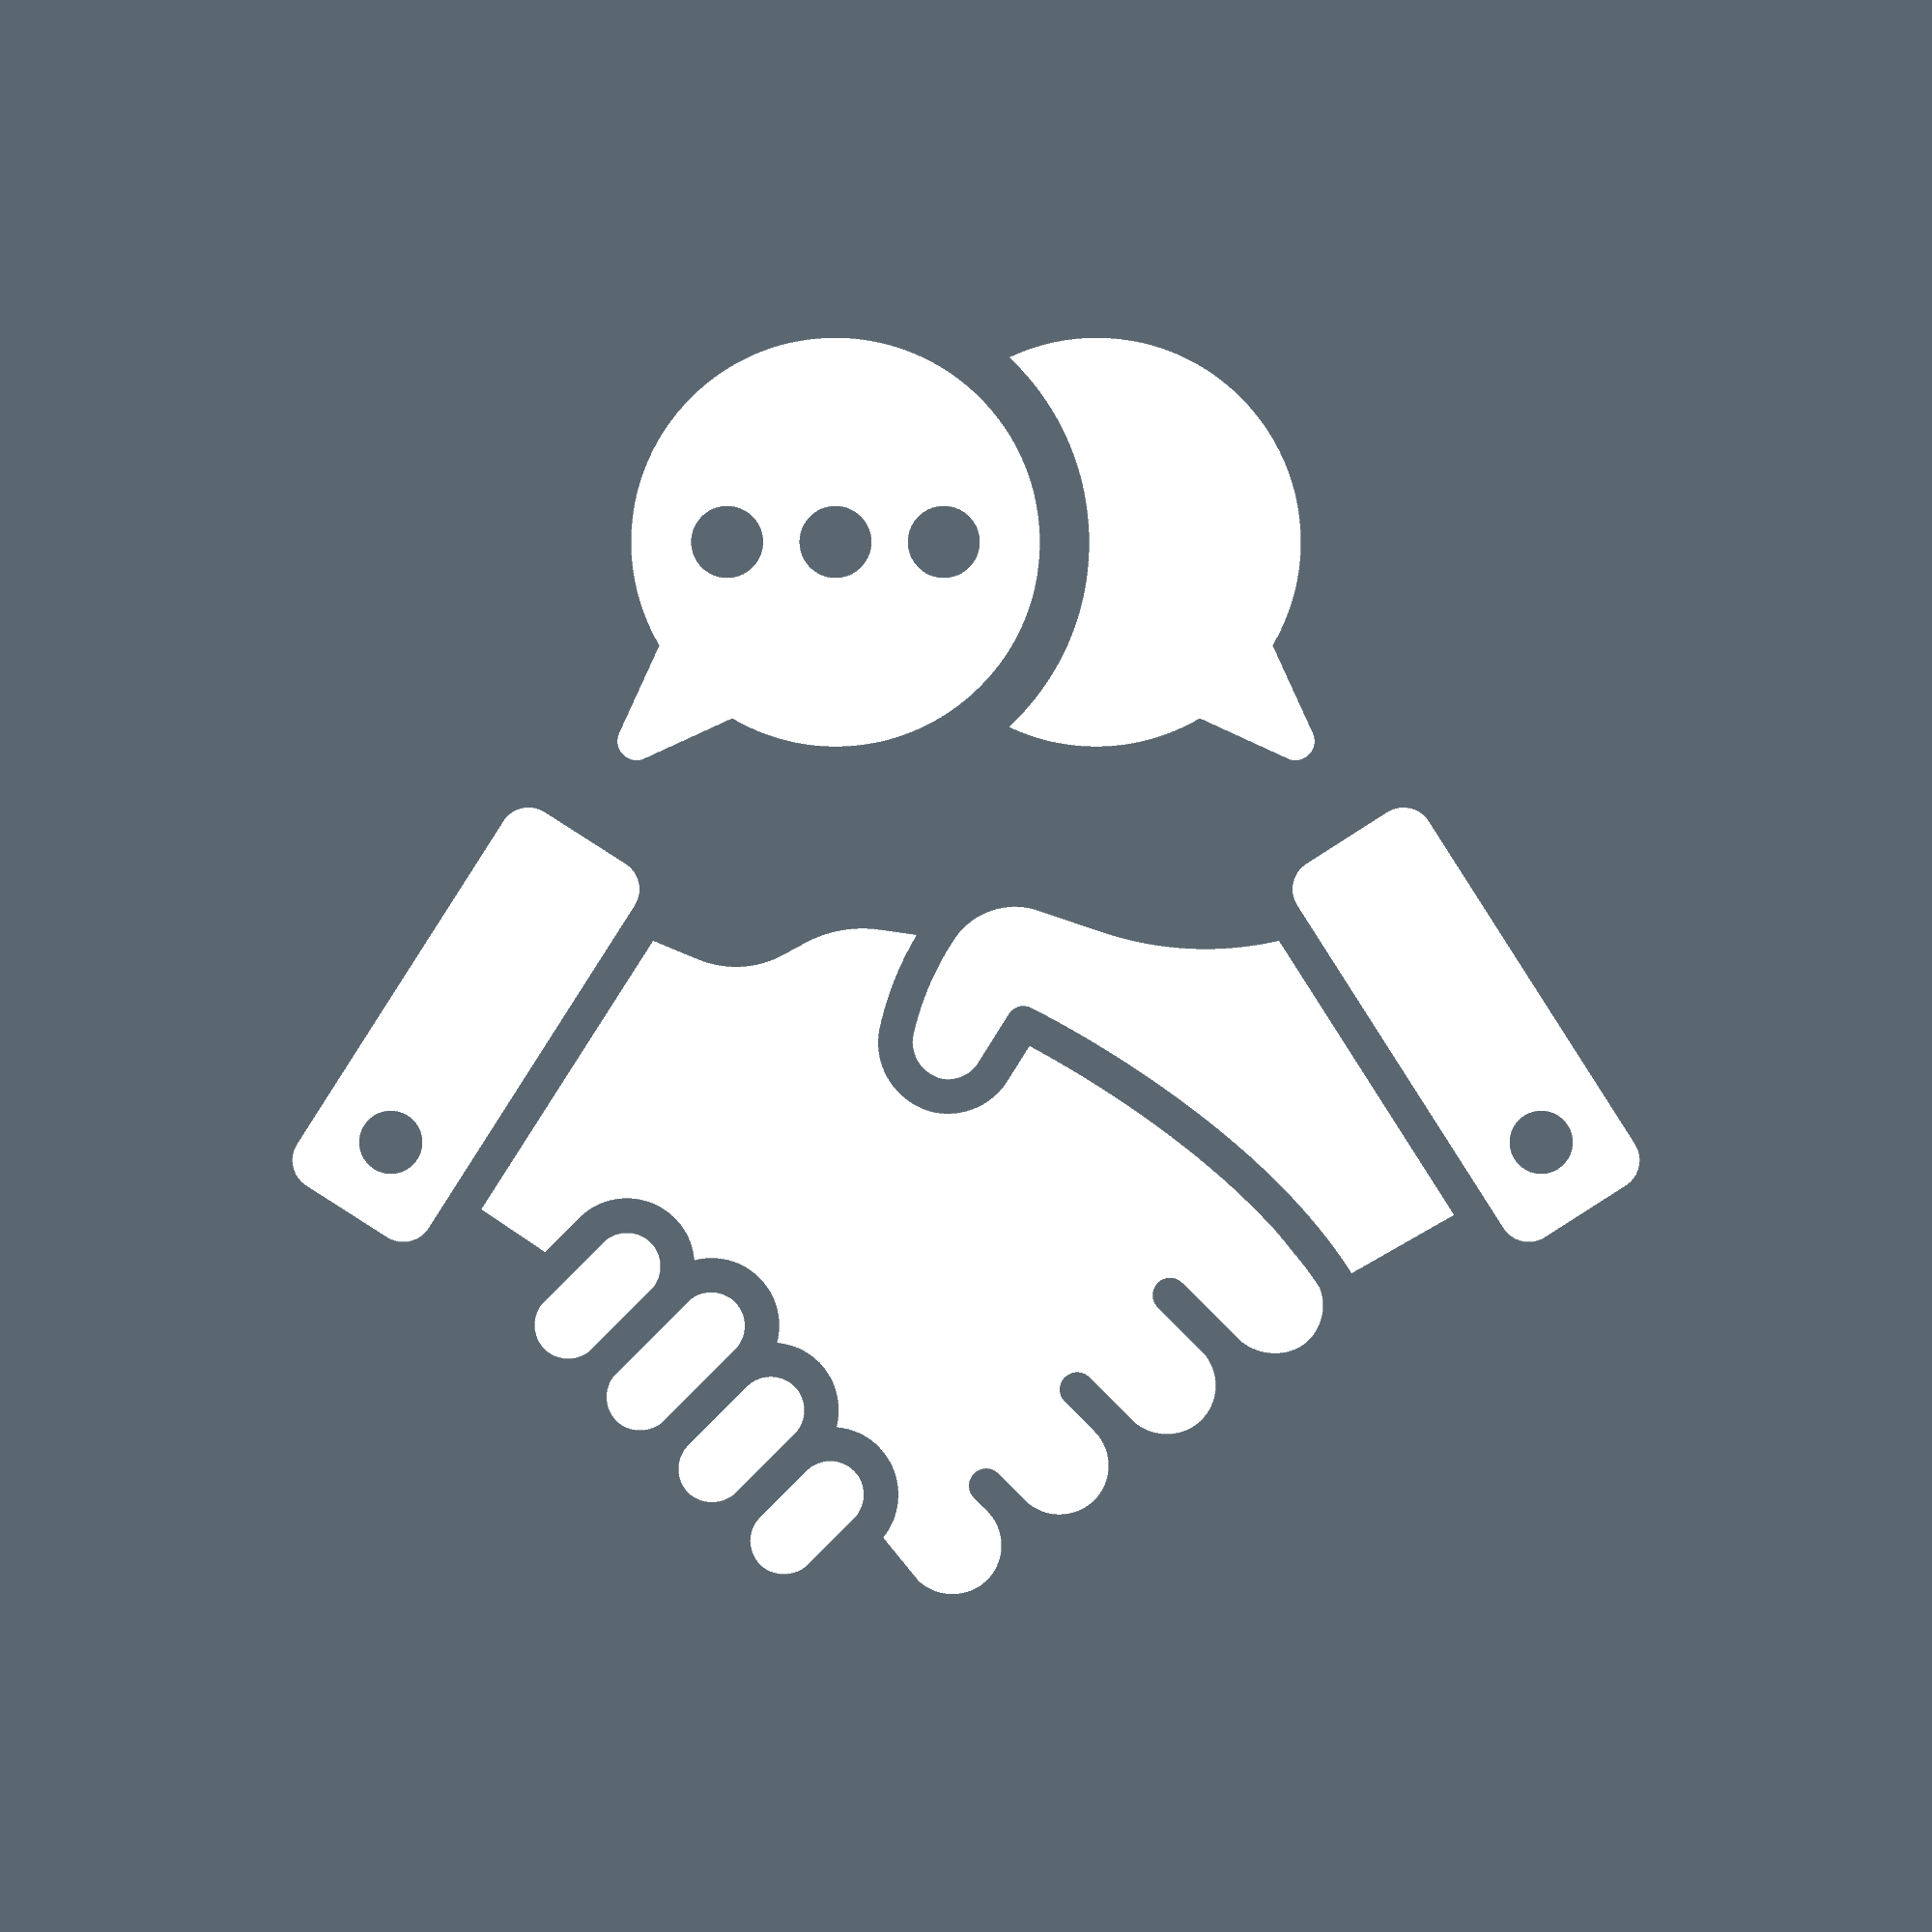 A Tinley Park handshake with speech bubbles on a gray background.